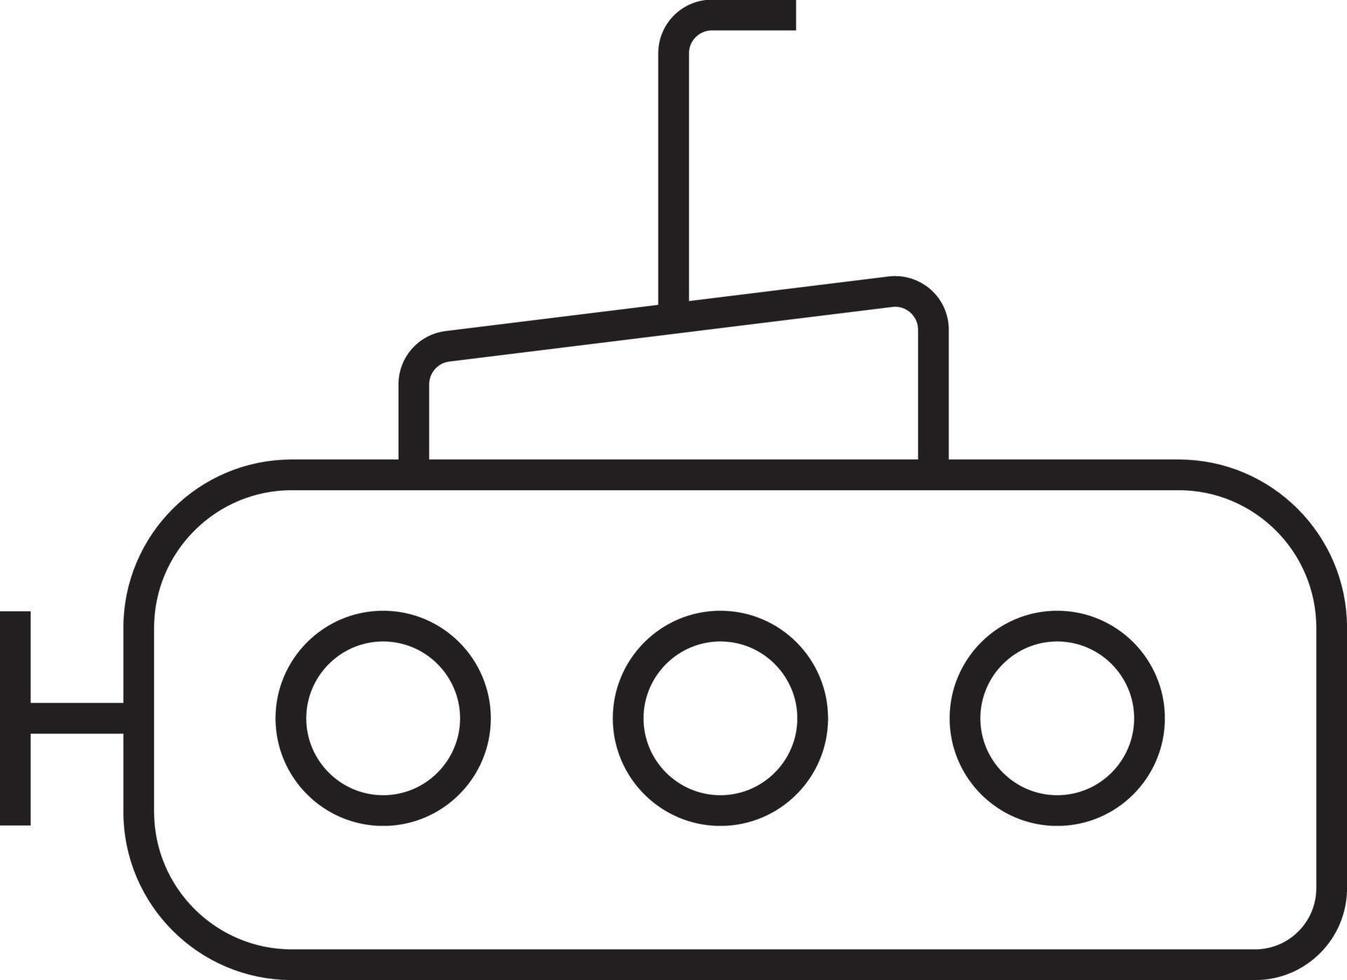 Submarine Transportation icon people icons with black outline style. Vehicle, symbol, transport, line, outline, station, travel, automobile, editable, pictogram, isolated, flat. Vector illustration